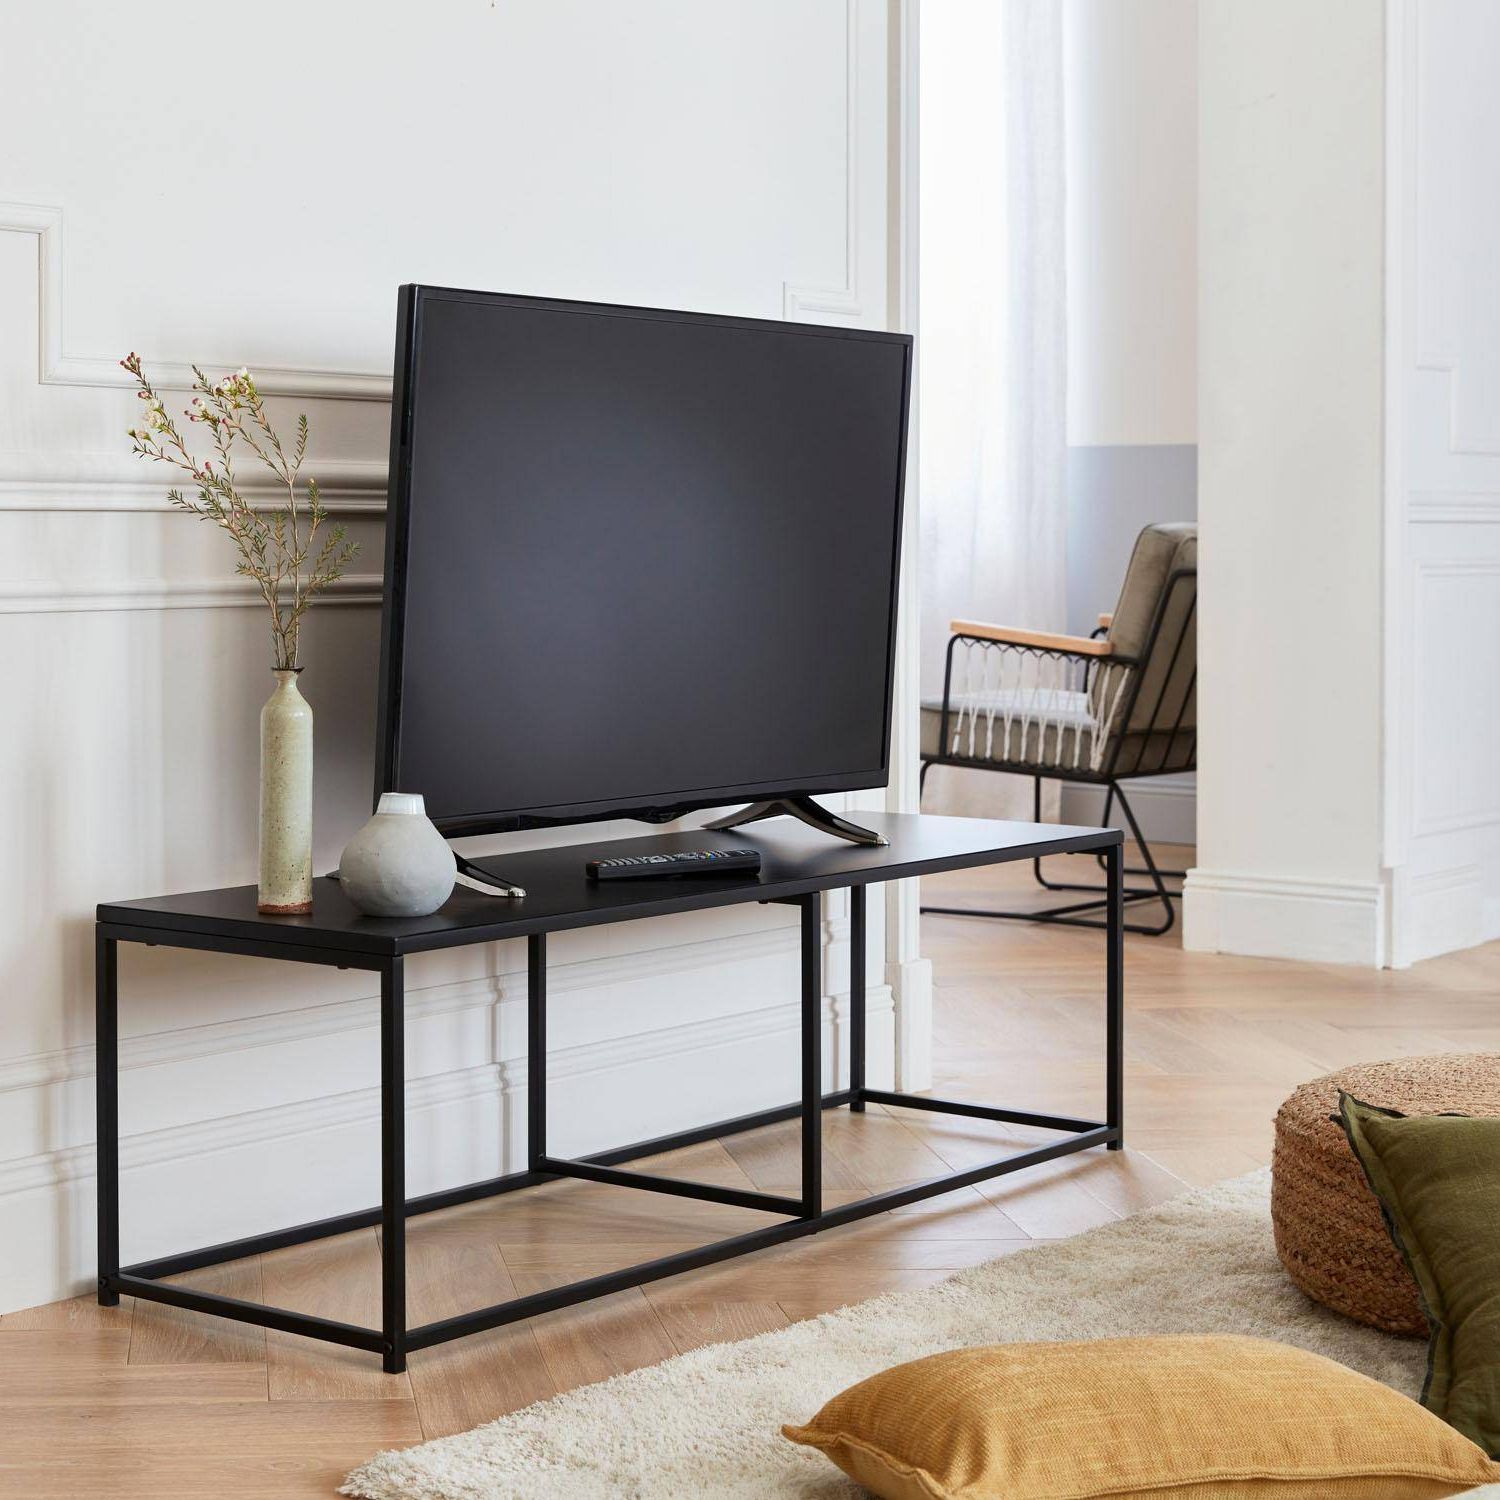 Most Recent Industrial – Black Metal Tv Unit – 140x40x40cm Intended For Bronze Metal Tv Stands (View 10 of 10)